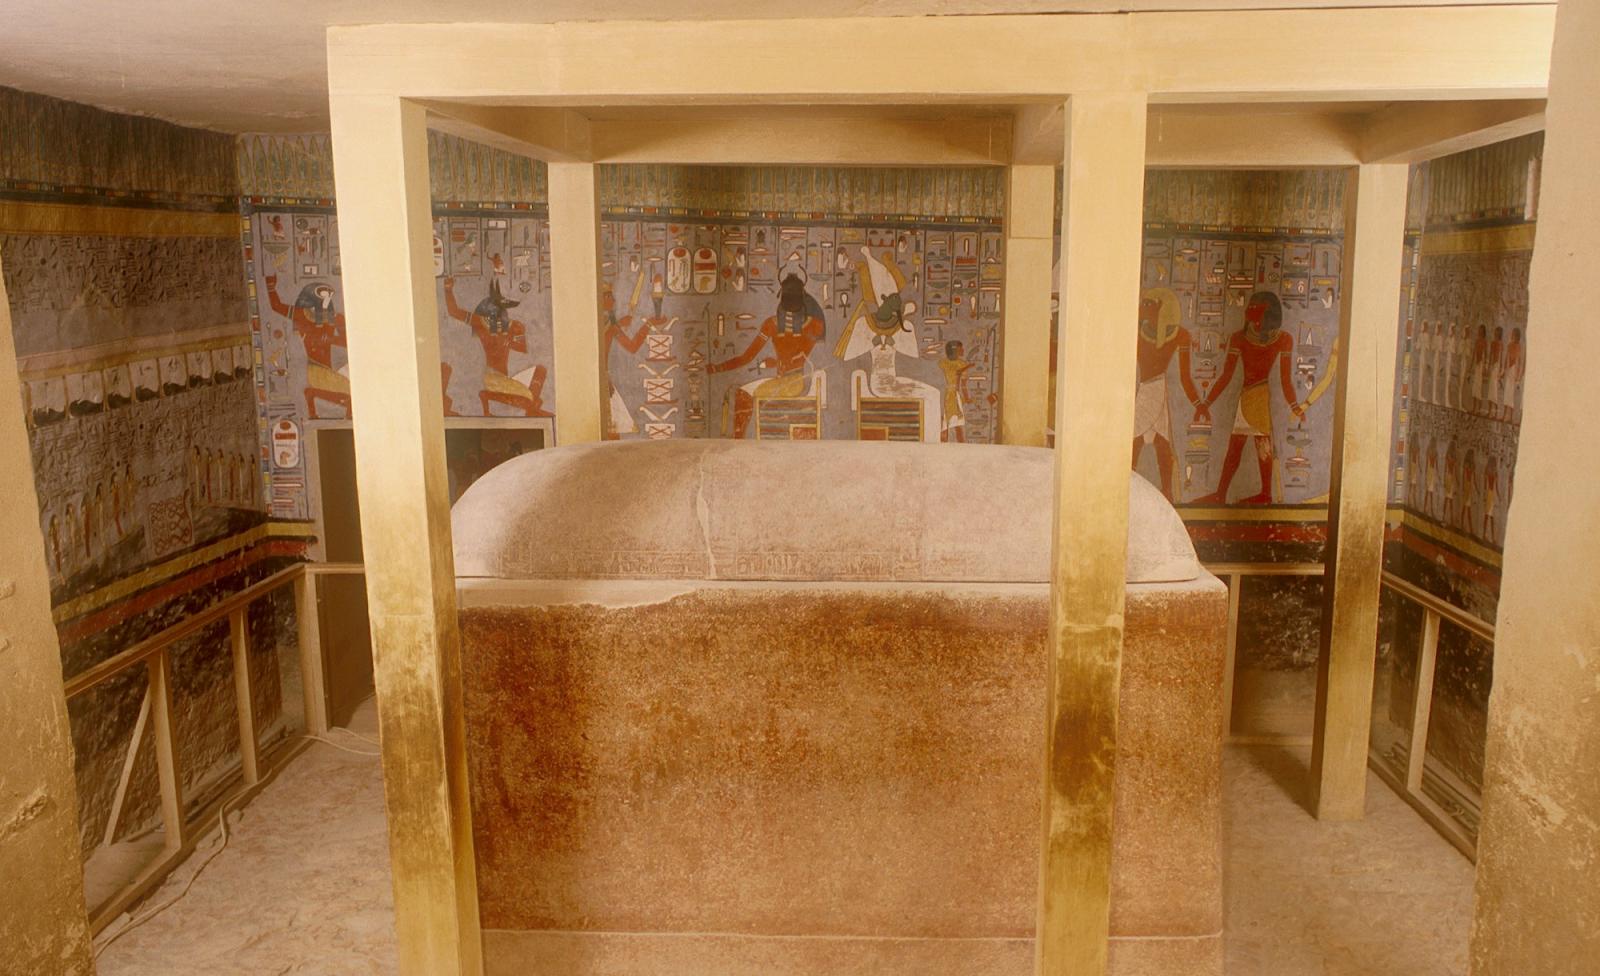 Book of Gates on walls; sarcophagus in center.